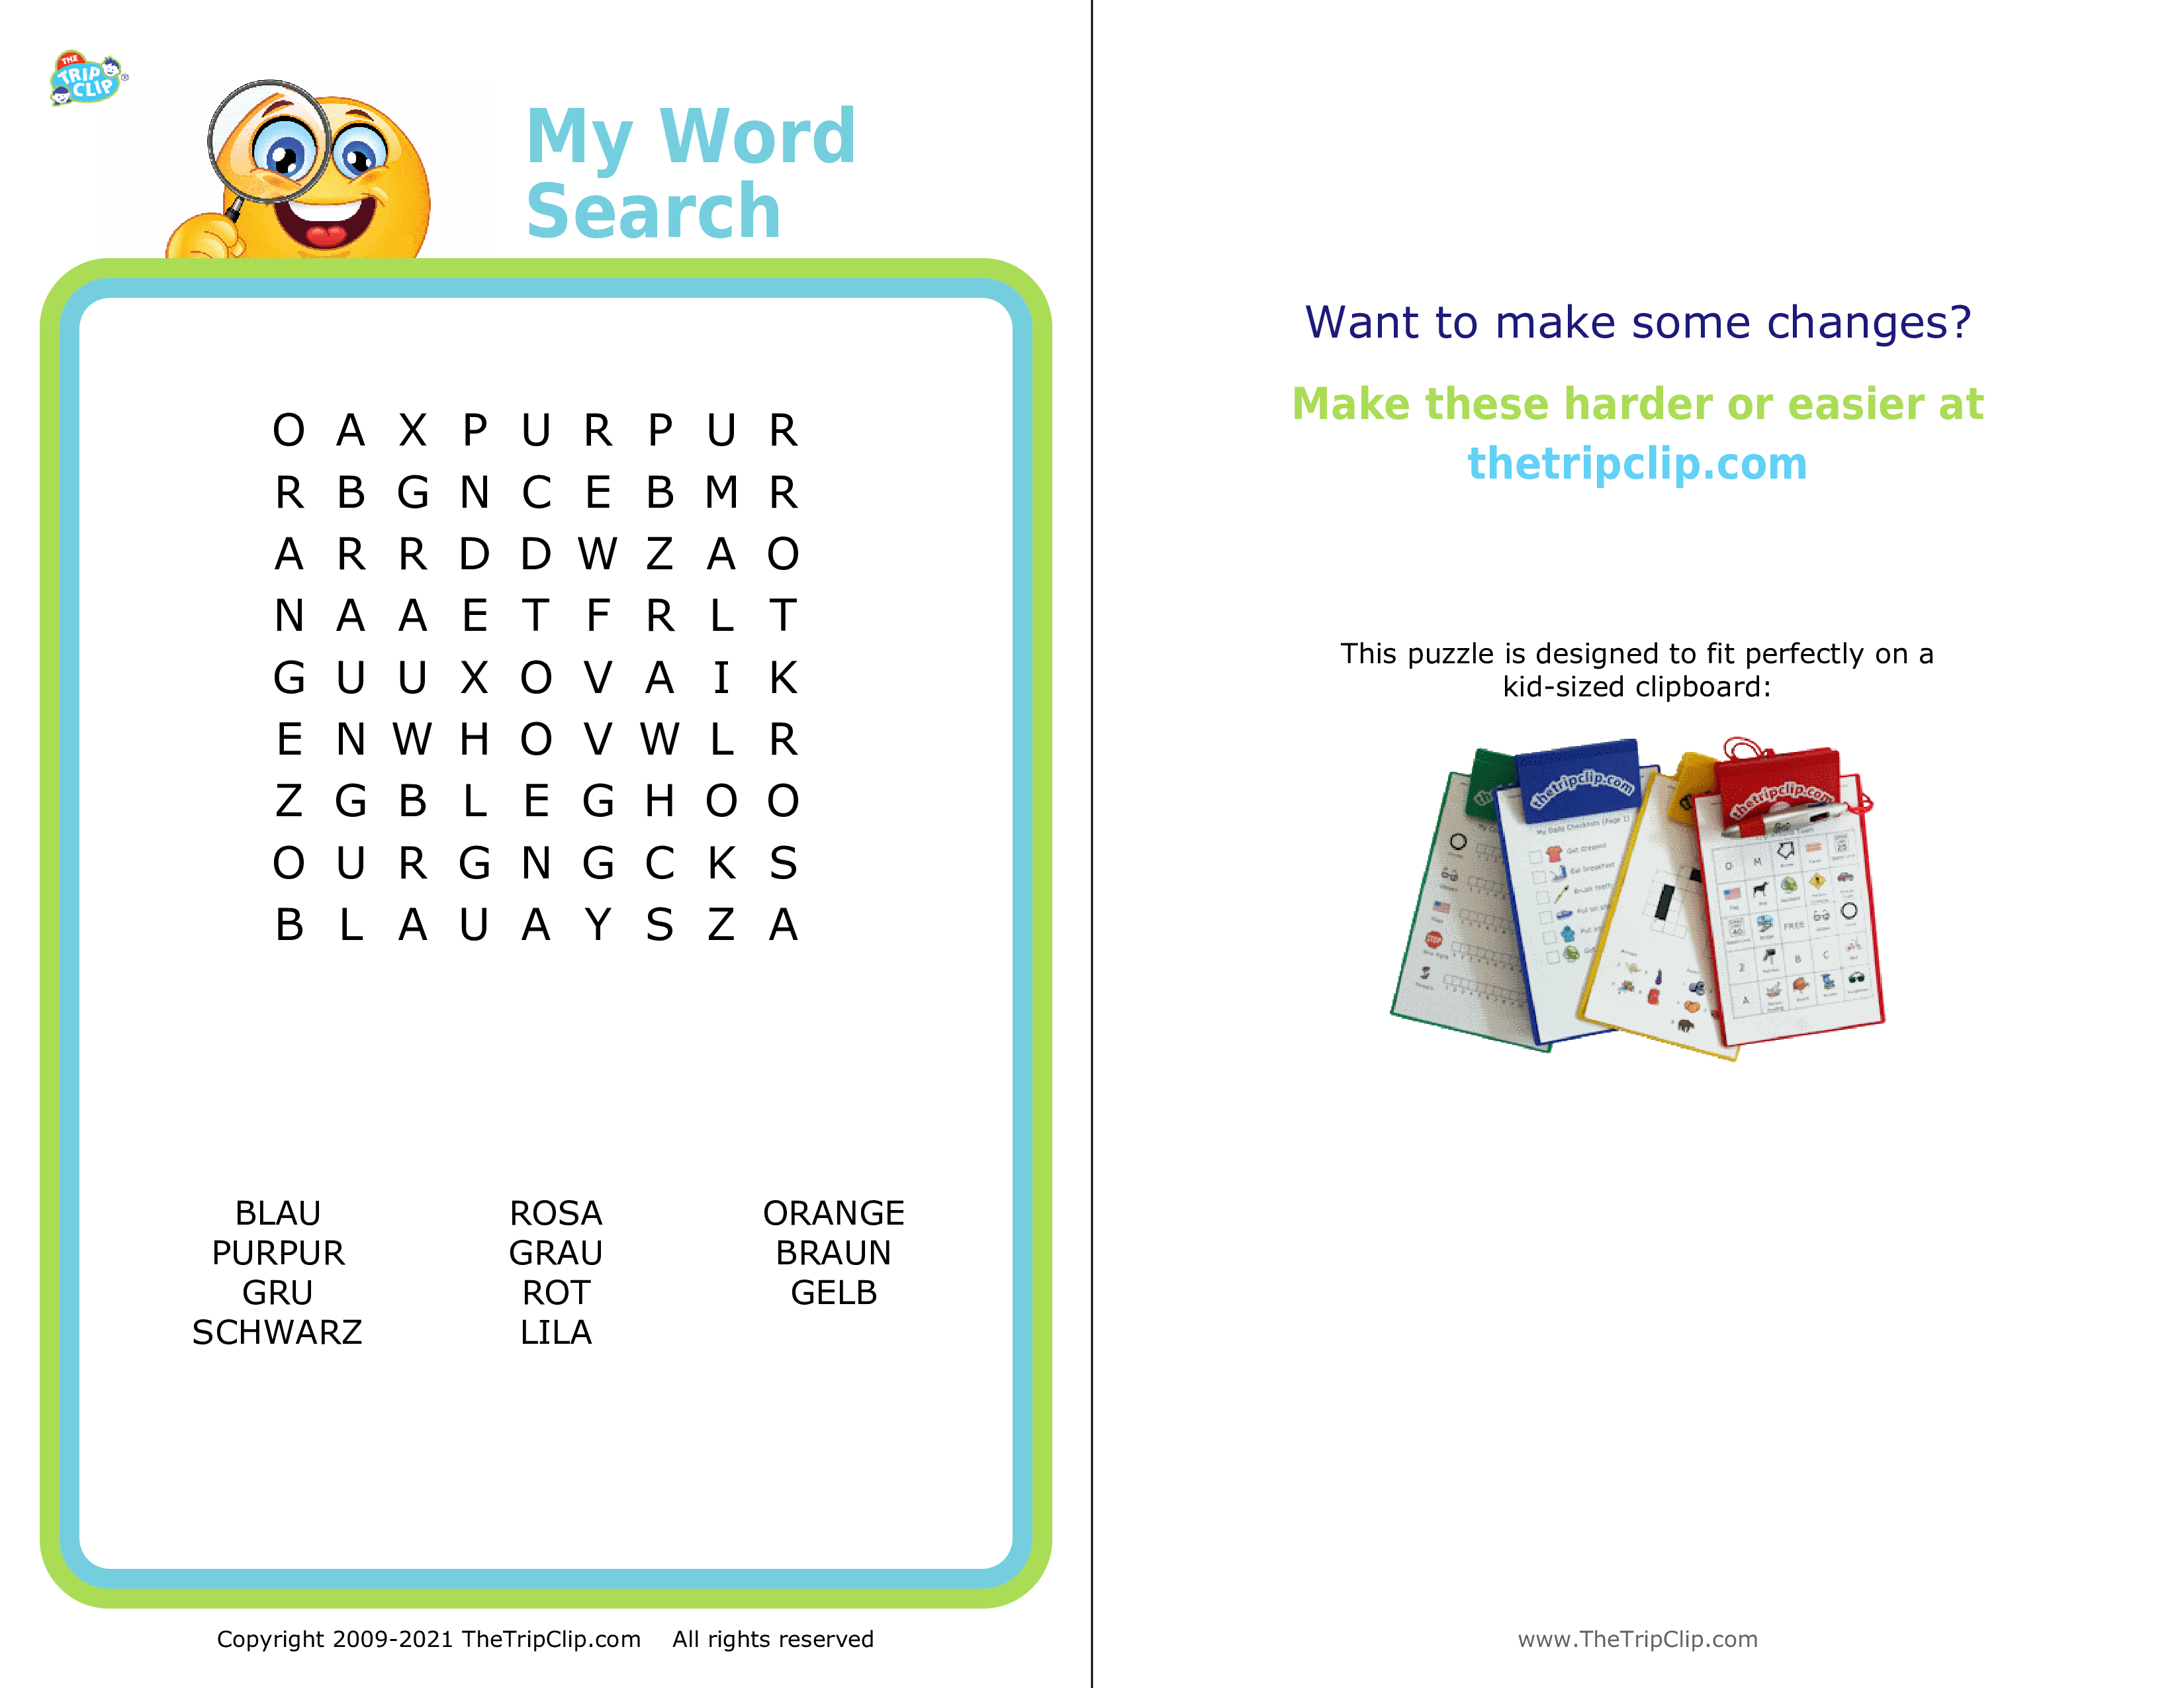 Grocery word search puzzle 9x9 - colors in gernman